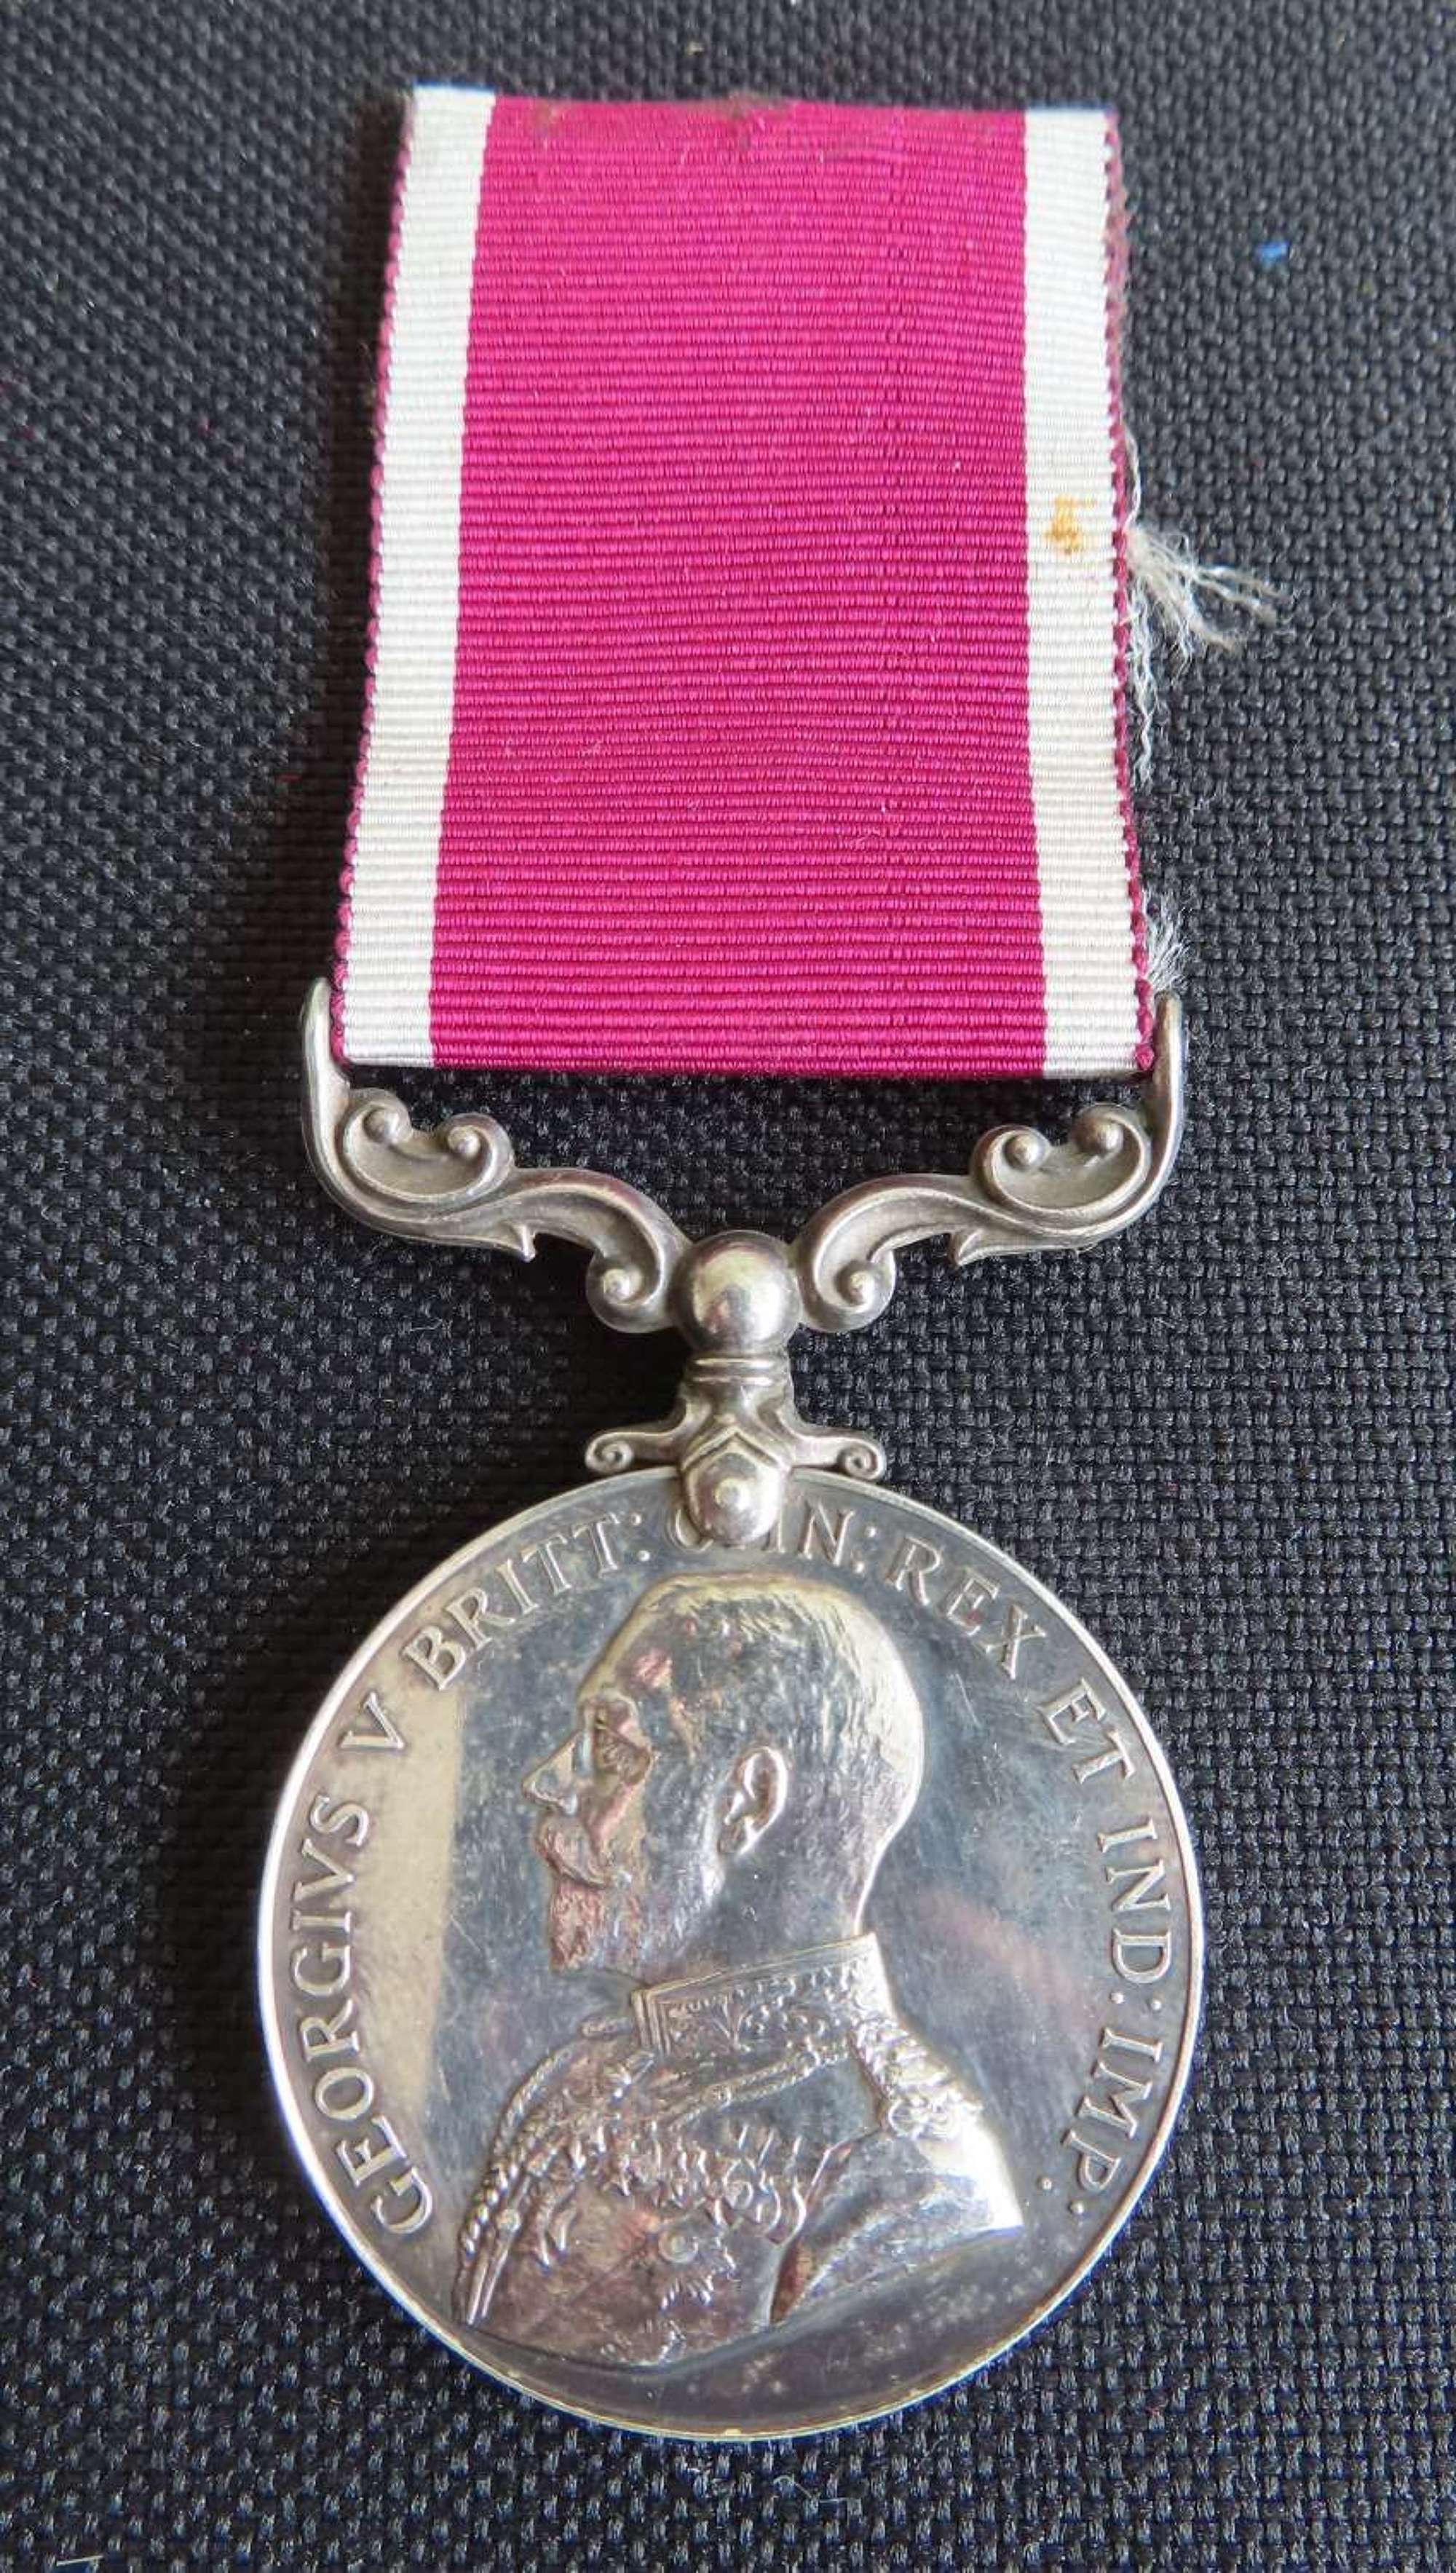 Long service good conduct medal awarded to Sjt Johnston R.E.